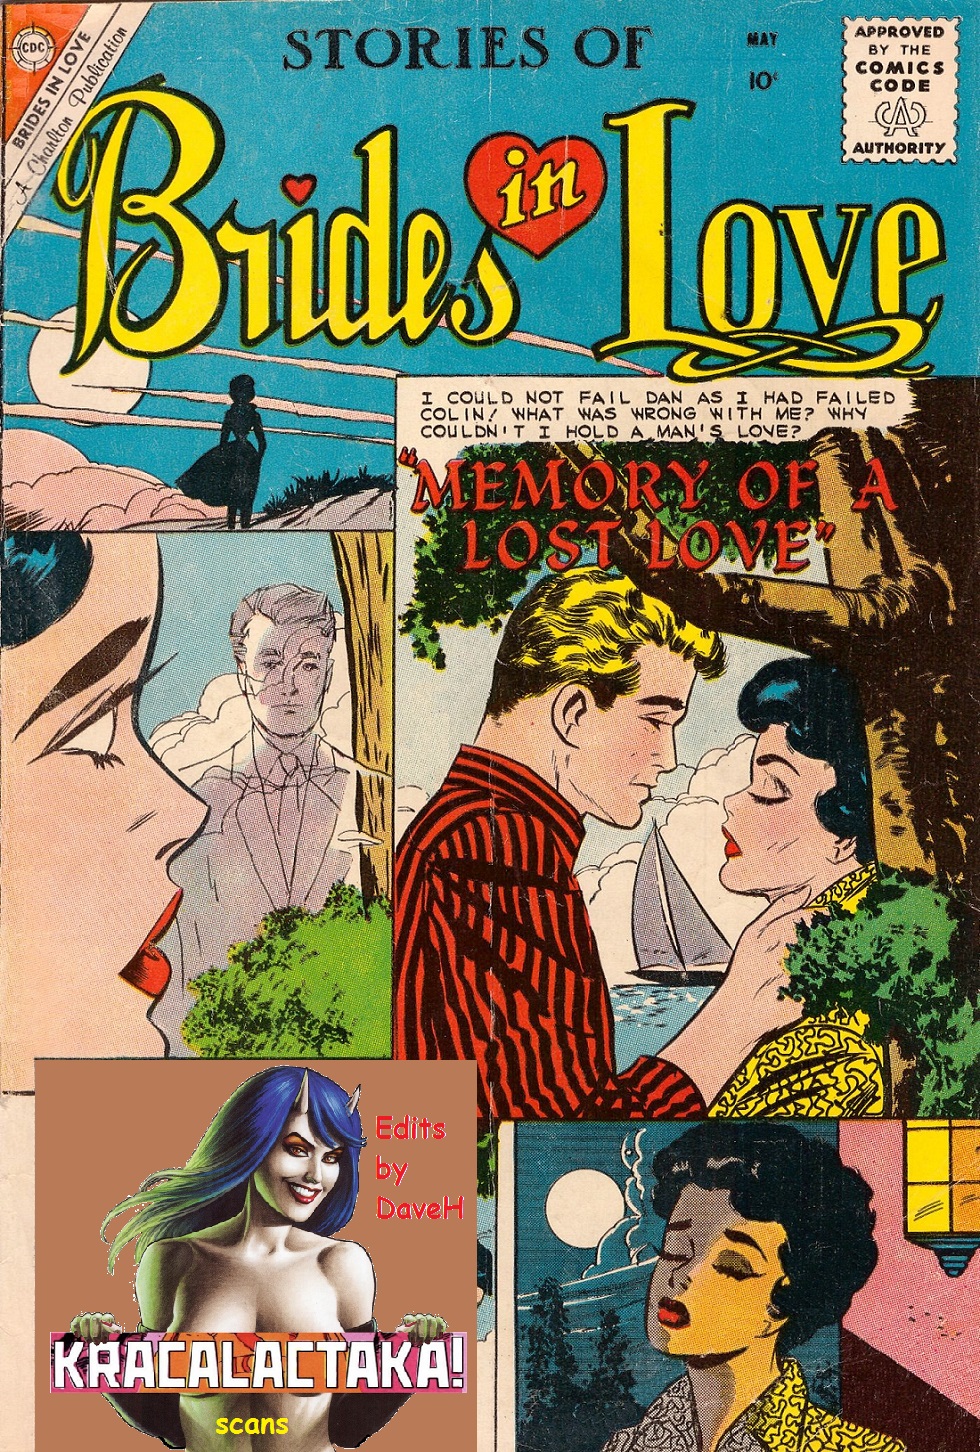 Read online Brides in Love comic -  Issue #18 - 37